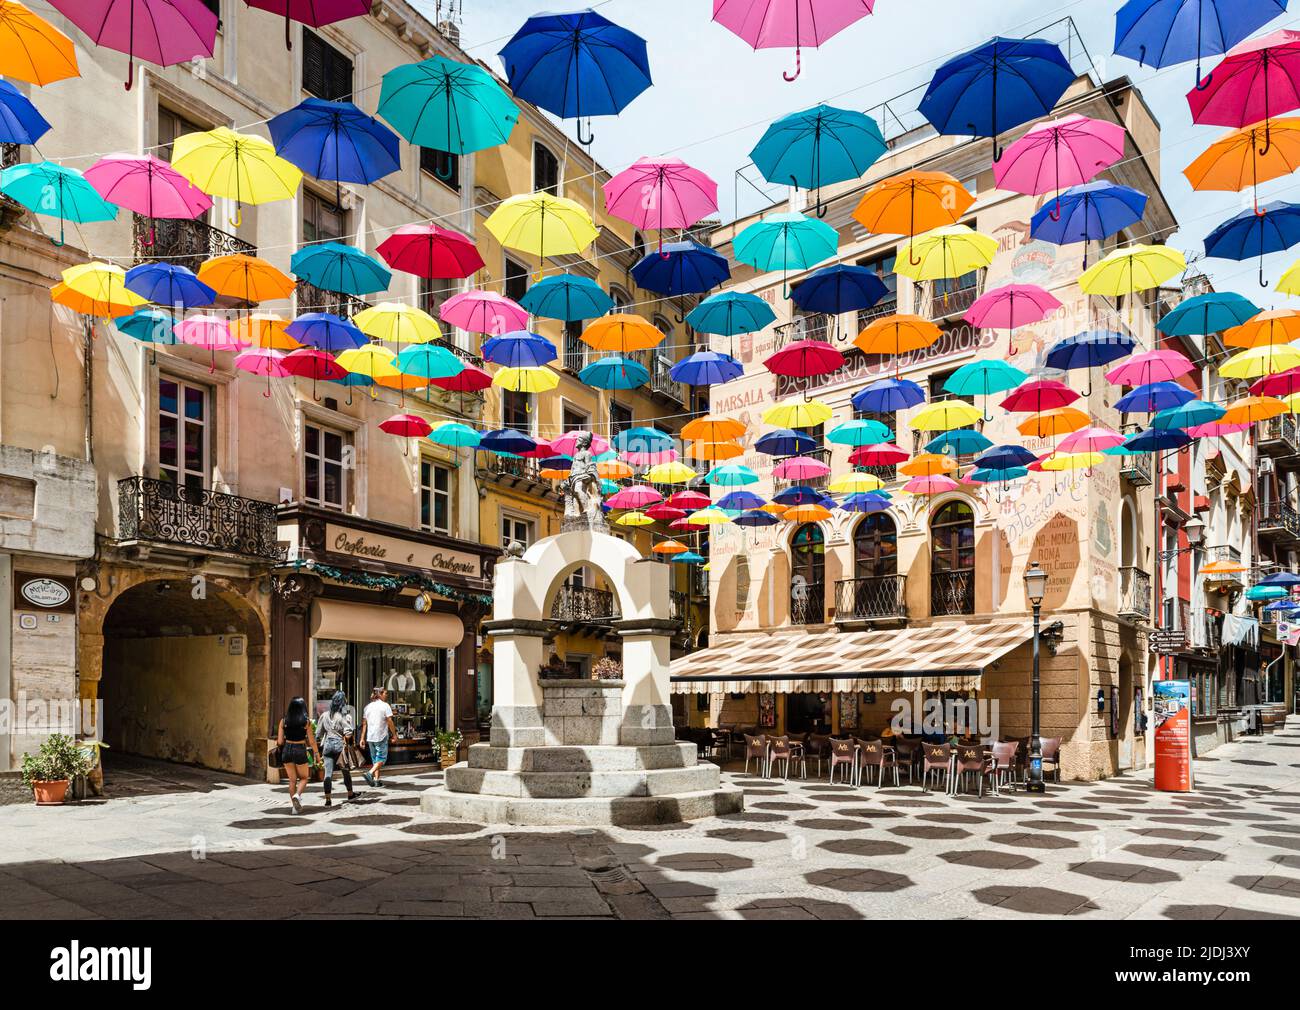 Colourful parasols protect passers-by in the Piazza Lamarmora surrounded by historic houses in the old town of Iglesias in south-west Sardinia,Italy Stock Photo